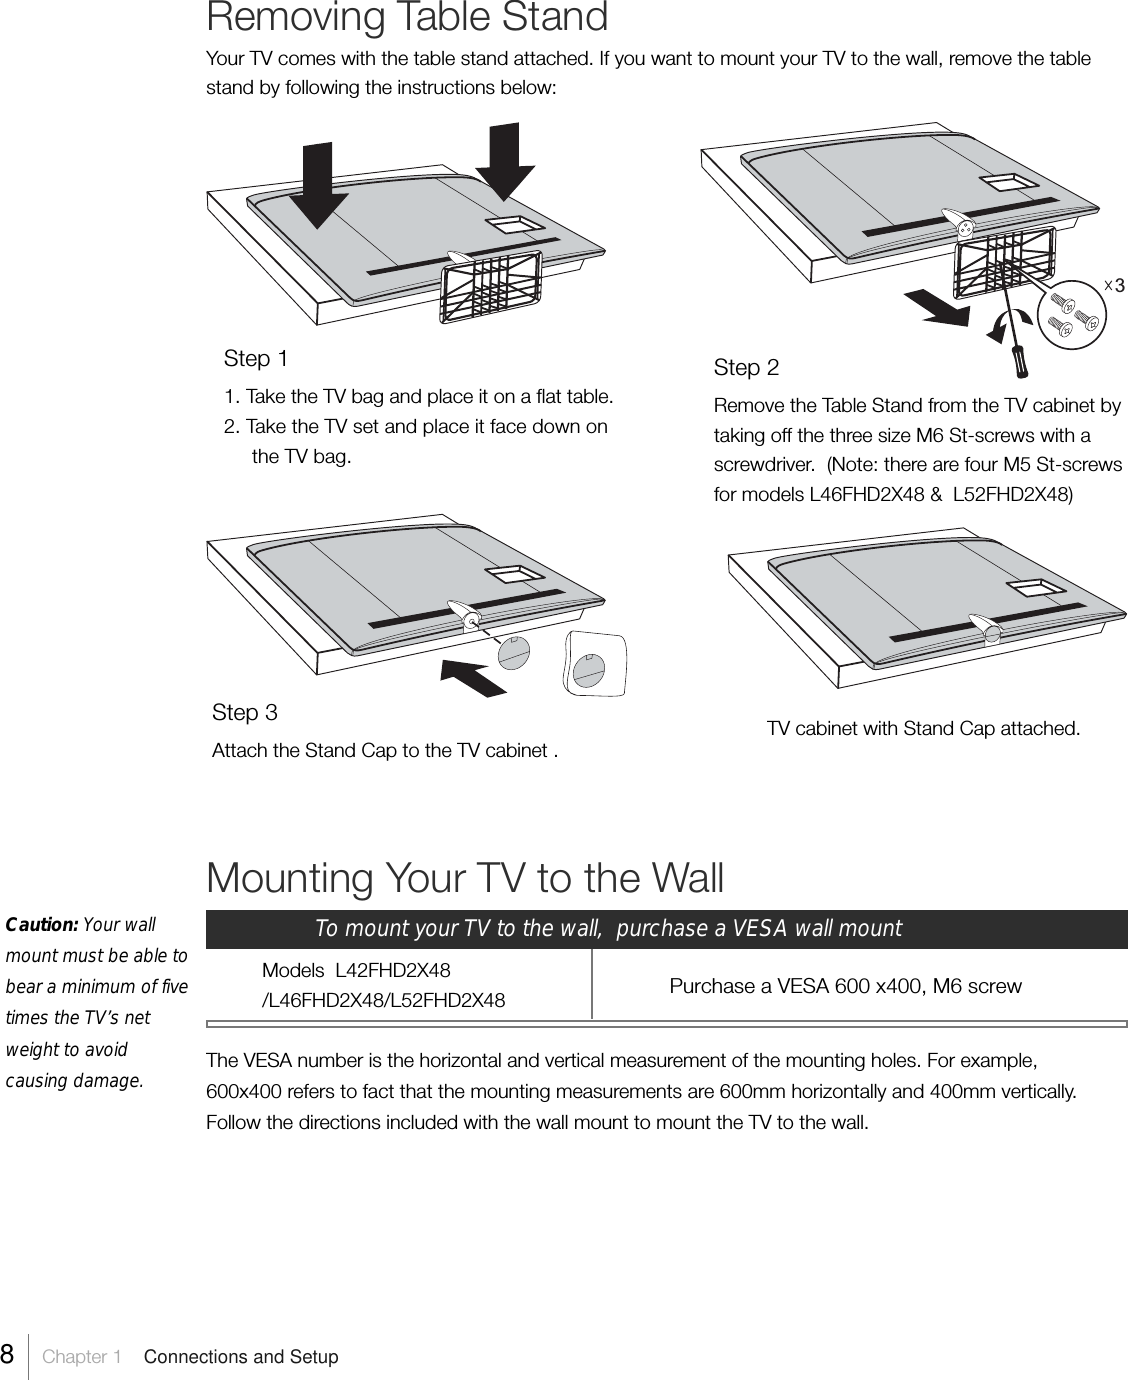 Removing Table StandYour TV comes with the table stand attached. If you want to mount your TV to the wall, remove the tablestand by following the instructions below:Step 11. Take the TV bag and place it on a flat table.2. Take the TV set and place it face down on     the TV bag.Step 2Remove the Table Stand from the TV cabinet bytaking off the three size M6 St-screws with ascrewdriver.  (Note: there are four M5 St-screwsfor models L46FHD2X48 &amp;  L52FHD2X48)Step 3Attach the Stand Cap to the TV cabinet .TV cabinet with Stand Cap attached.8    Chapter 1    Connections and Setup3Mounting Your TV to the WallTo mount your TV to the wall,  purchase a VESA wall mountModels  L42FHD2X48/L46FHD2X48/L52FHD2X48 Purchase a VESA 600 x400, M6 screwThe VESA number is the horizontal and vertical measurement of the mounting holes. For example,600x400 refers to fact that the mounting measurements are 600mm horizontally and 400mm vertically.Follow the directions included with the wall mount to mount the TV to the wall.Caution: Your wallmount must be able tobear a minimum of fivetimes the TV’s netweight to avoidcausing damage.